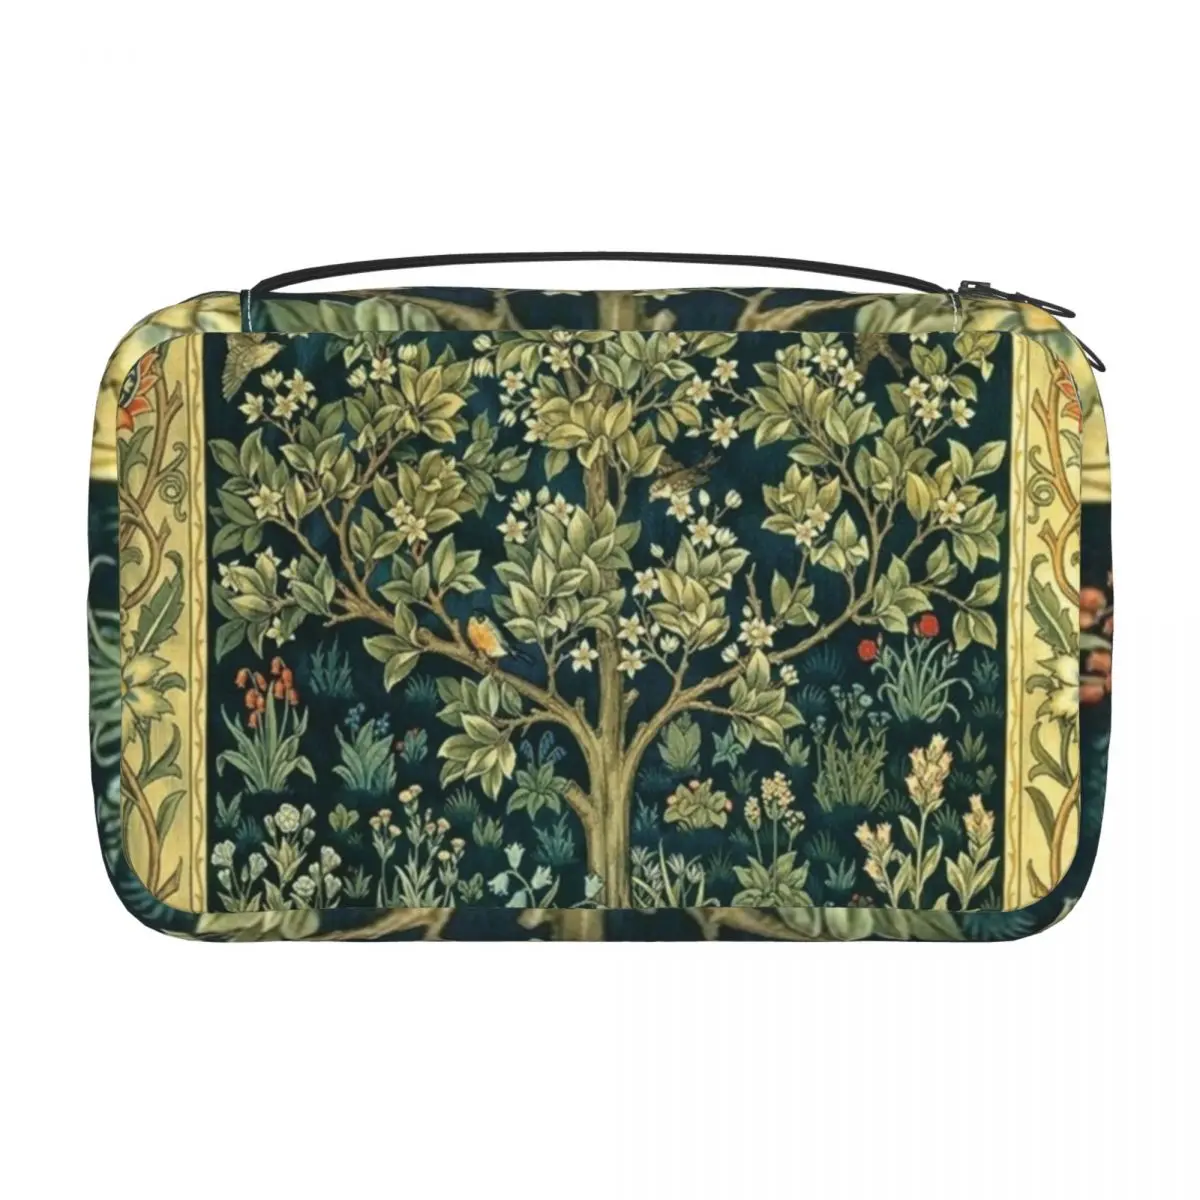 Cute Tree Of Life By William Morris Travel Toiletry Bag Women Hanging Floral Textile Pattern Makeup Cosmetic Bag Dopp Kit